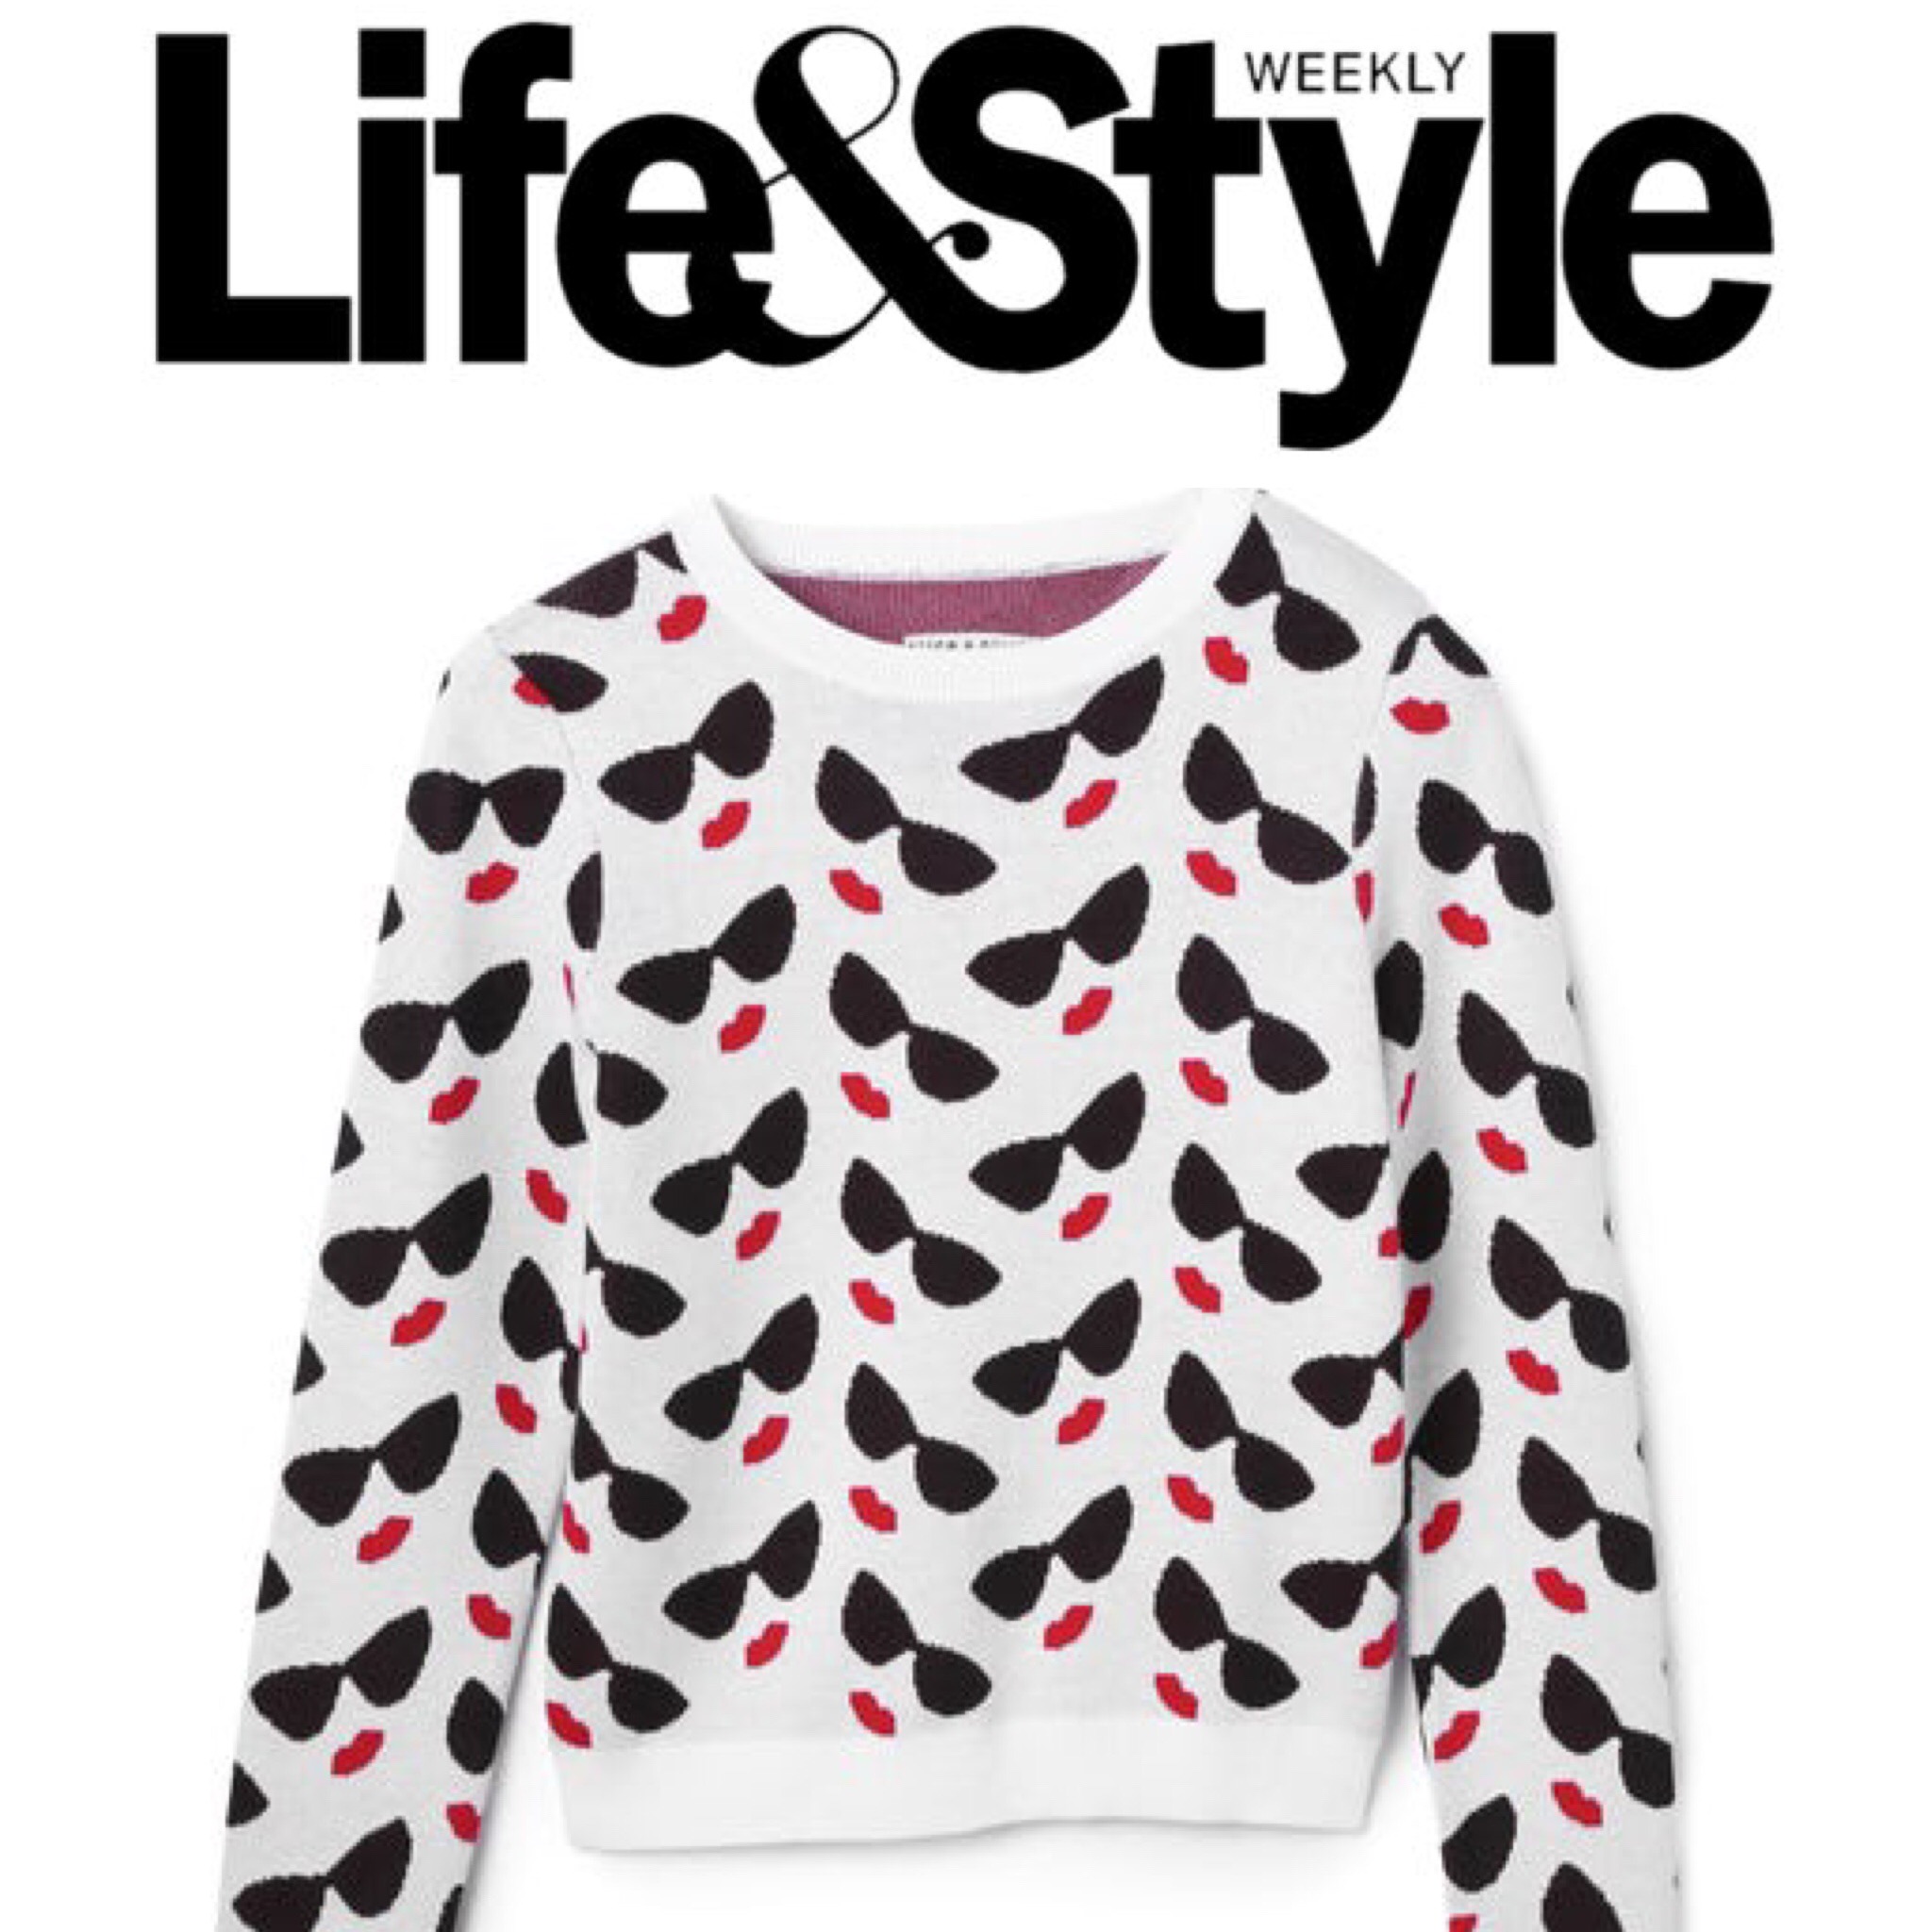  http://www.lifeandstylemag.com/posts/update-your-wardrobe-with-these-20-eye-catching-statement-sweaters-53444/photos/spring-statement-sweaters-styles-82494 